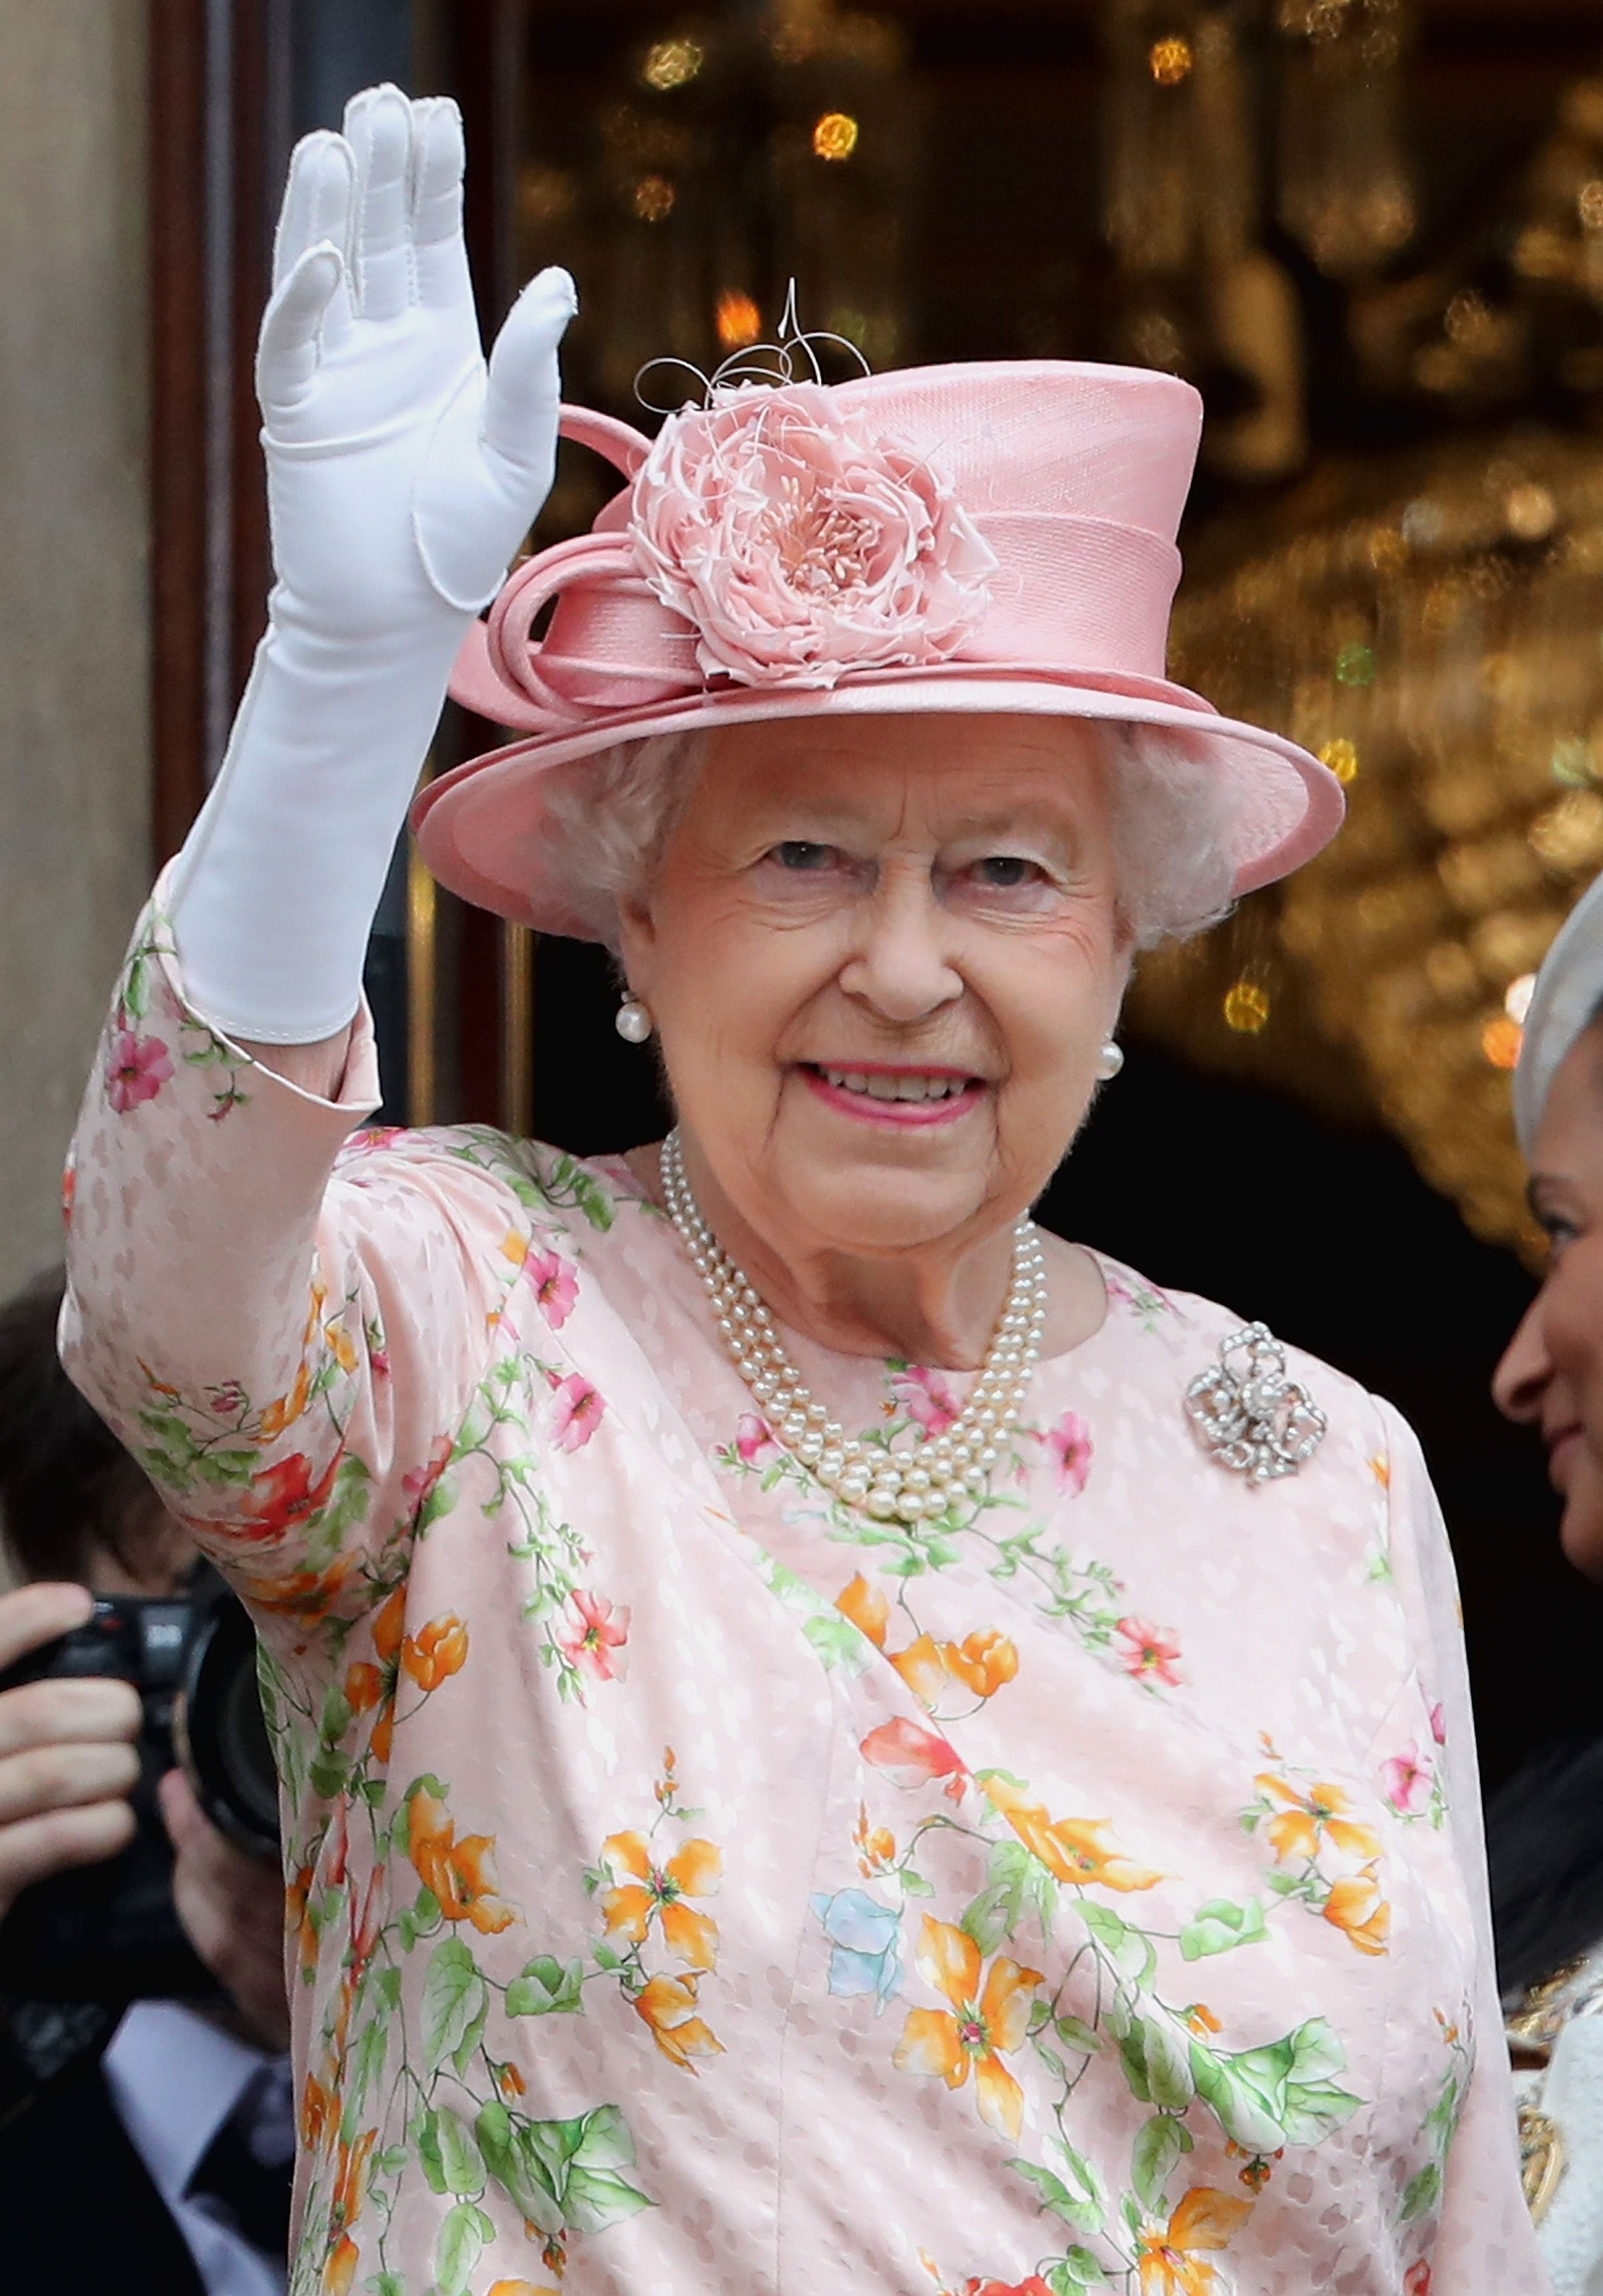 The Queen S Personal Train Features An Actual Bath And More